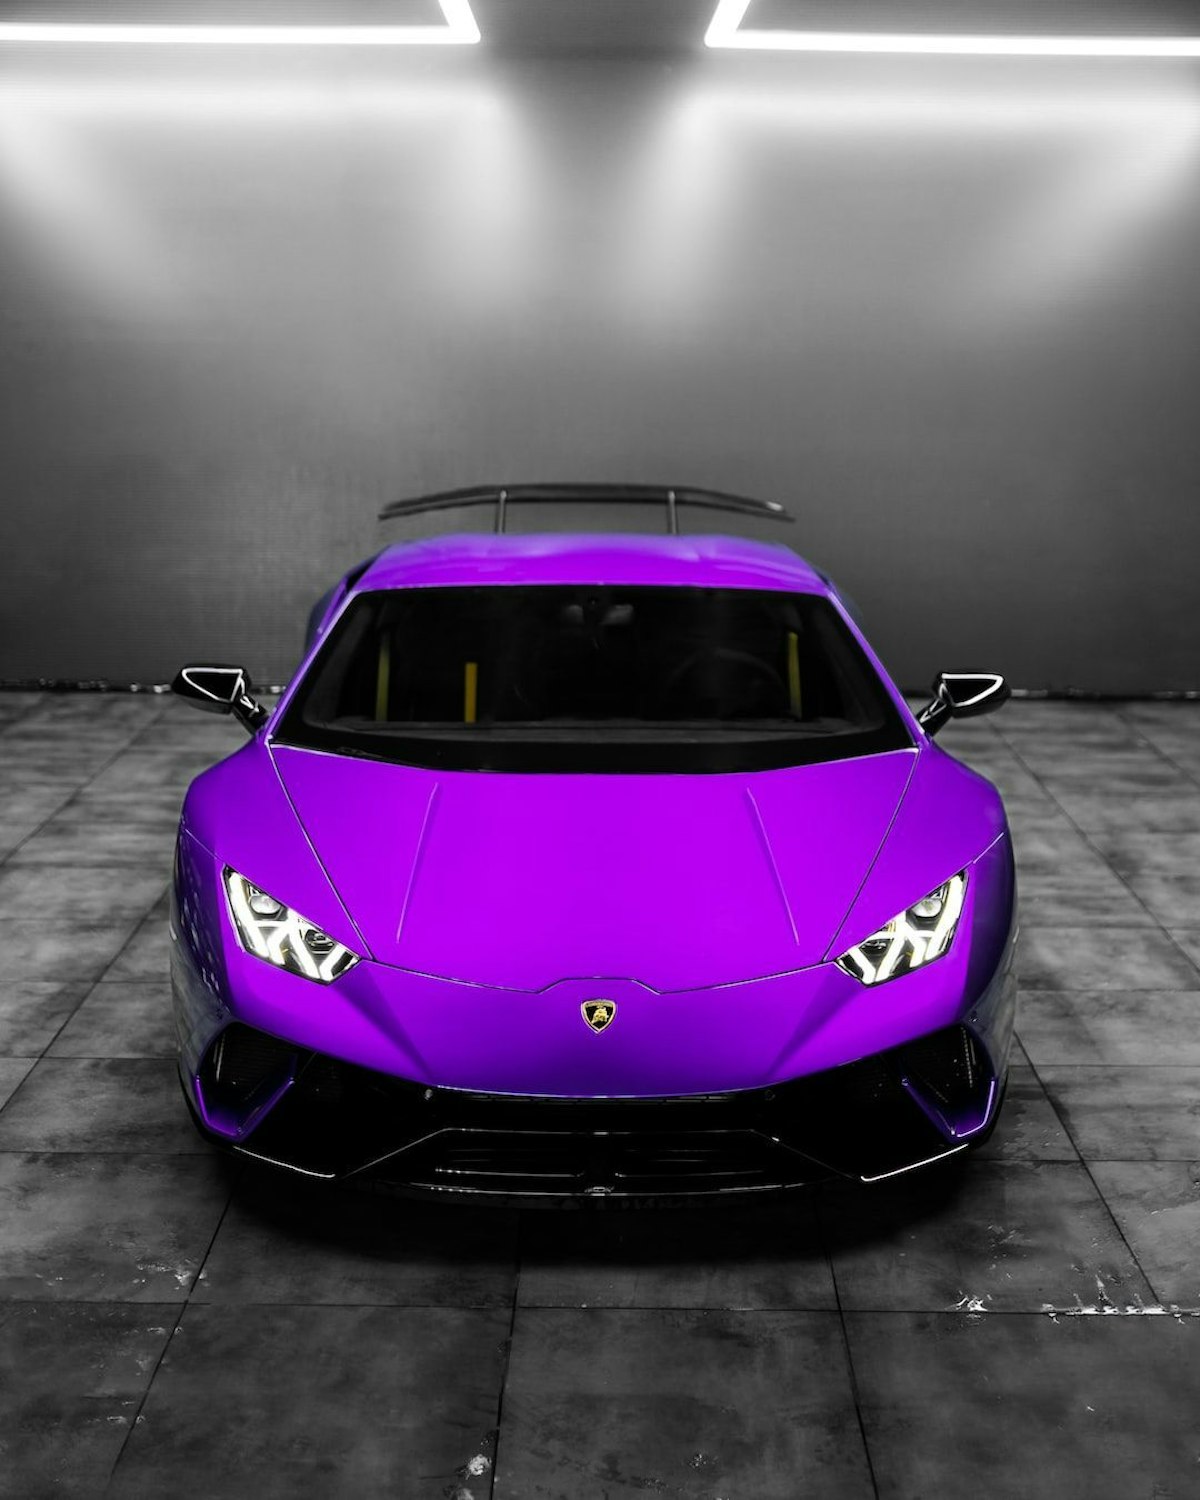 featured image - $PEPE, a Purple Lamborghini, and More: The Story Continues